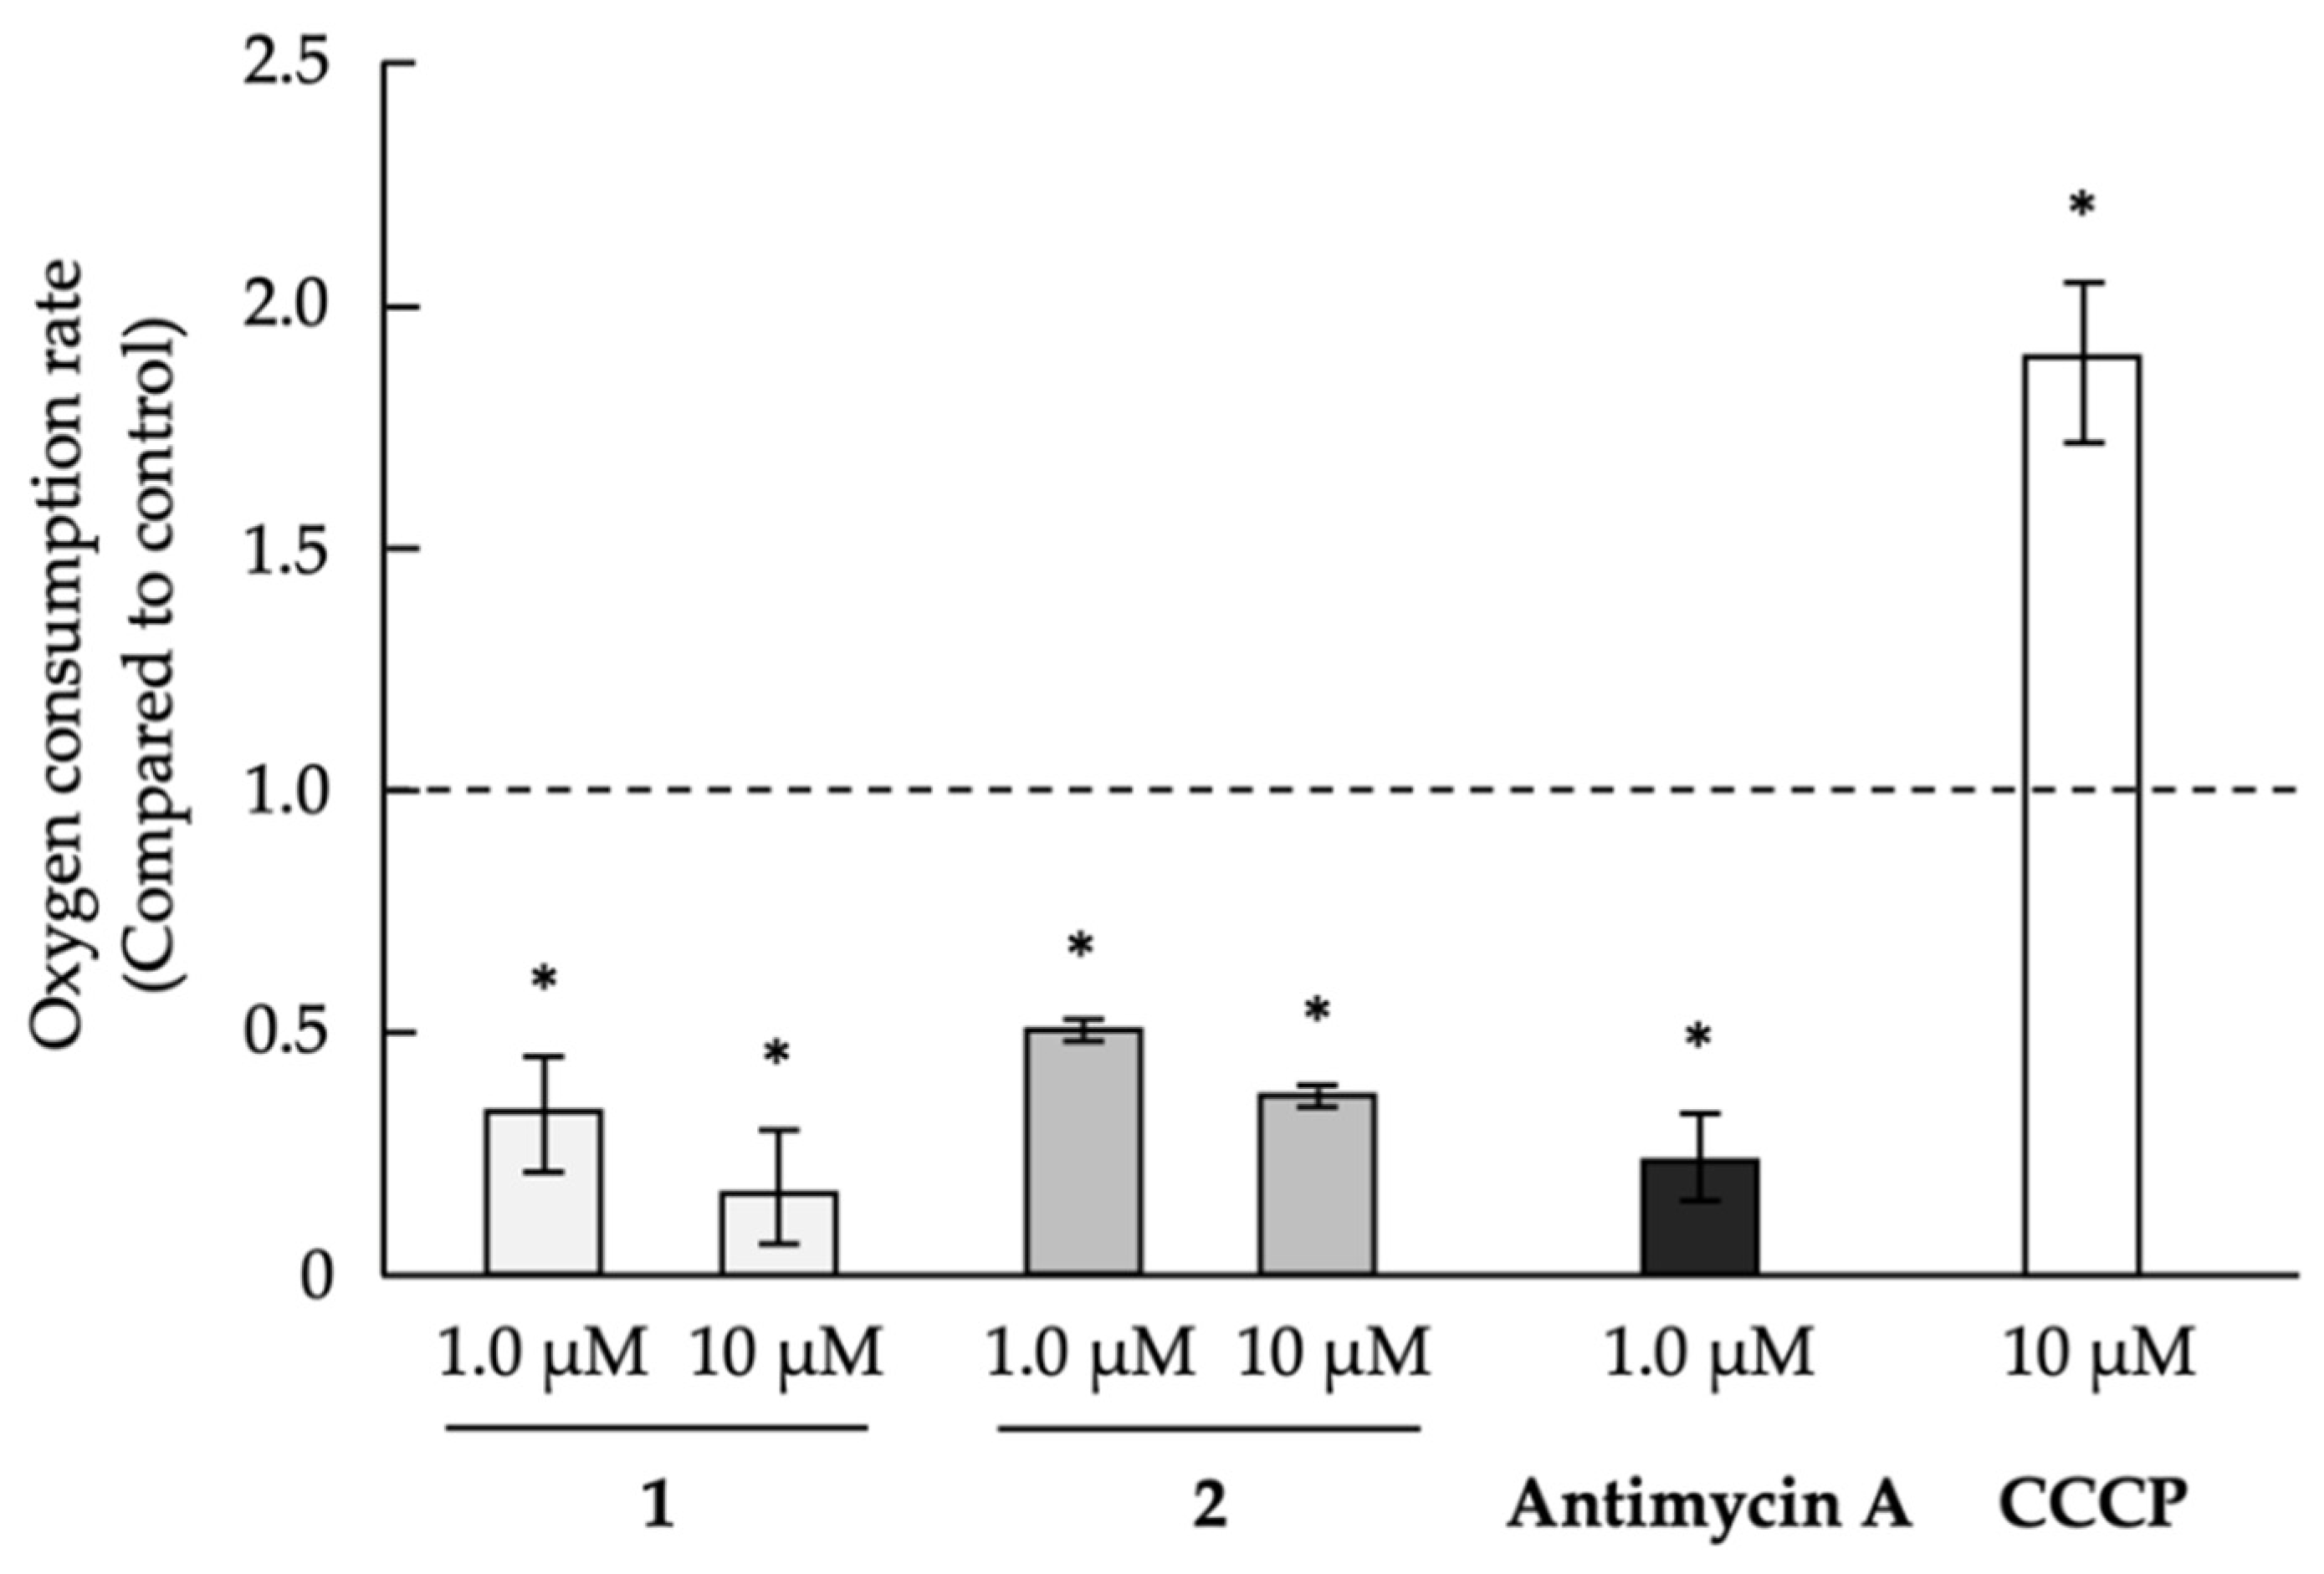 Marine Drugs | Free Full-Text | Mitochondrial Targeting in an  Anti-Austerity Approach Involving Bioactive Metabolites Isolated from the  Marine-Derived Fungus Aspergillus sp. | HTML